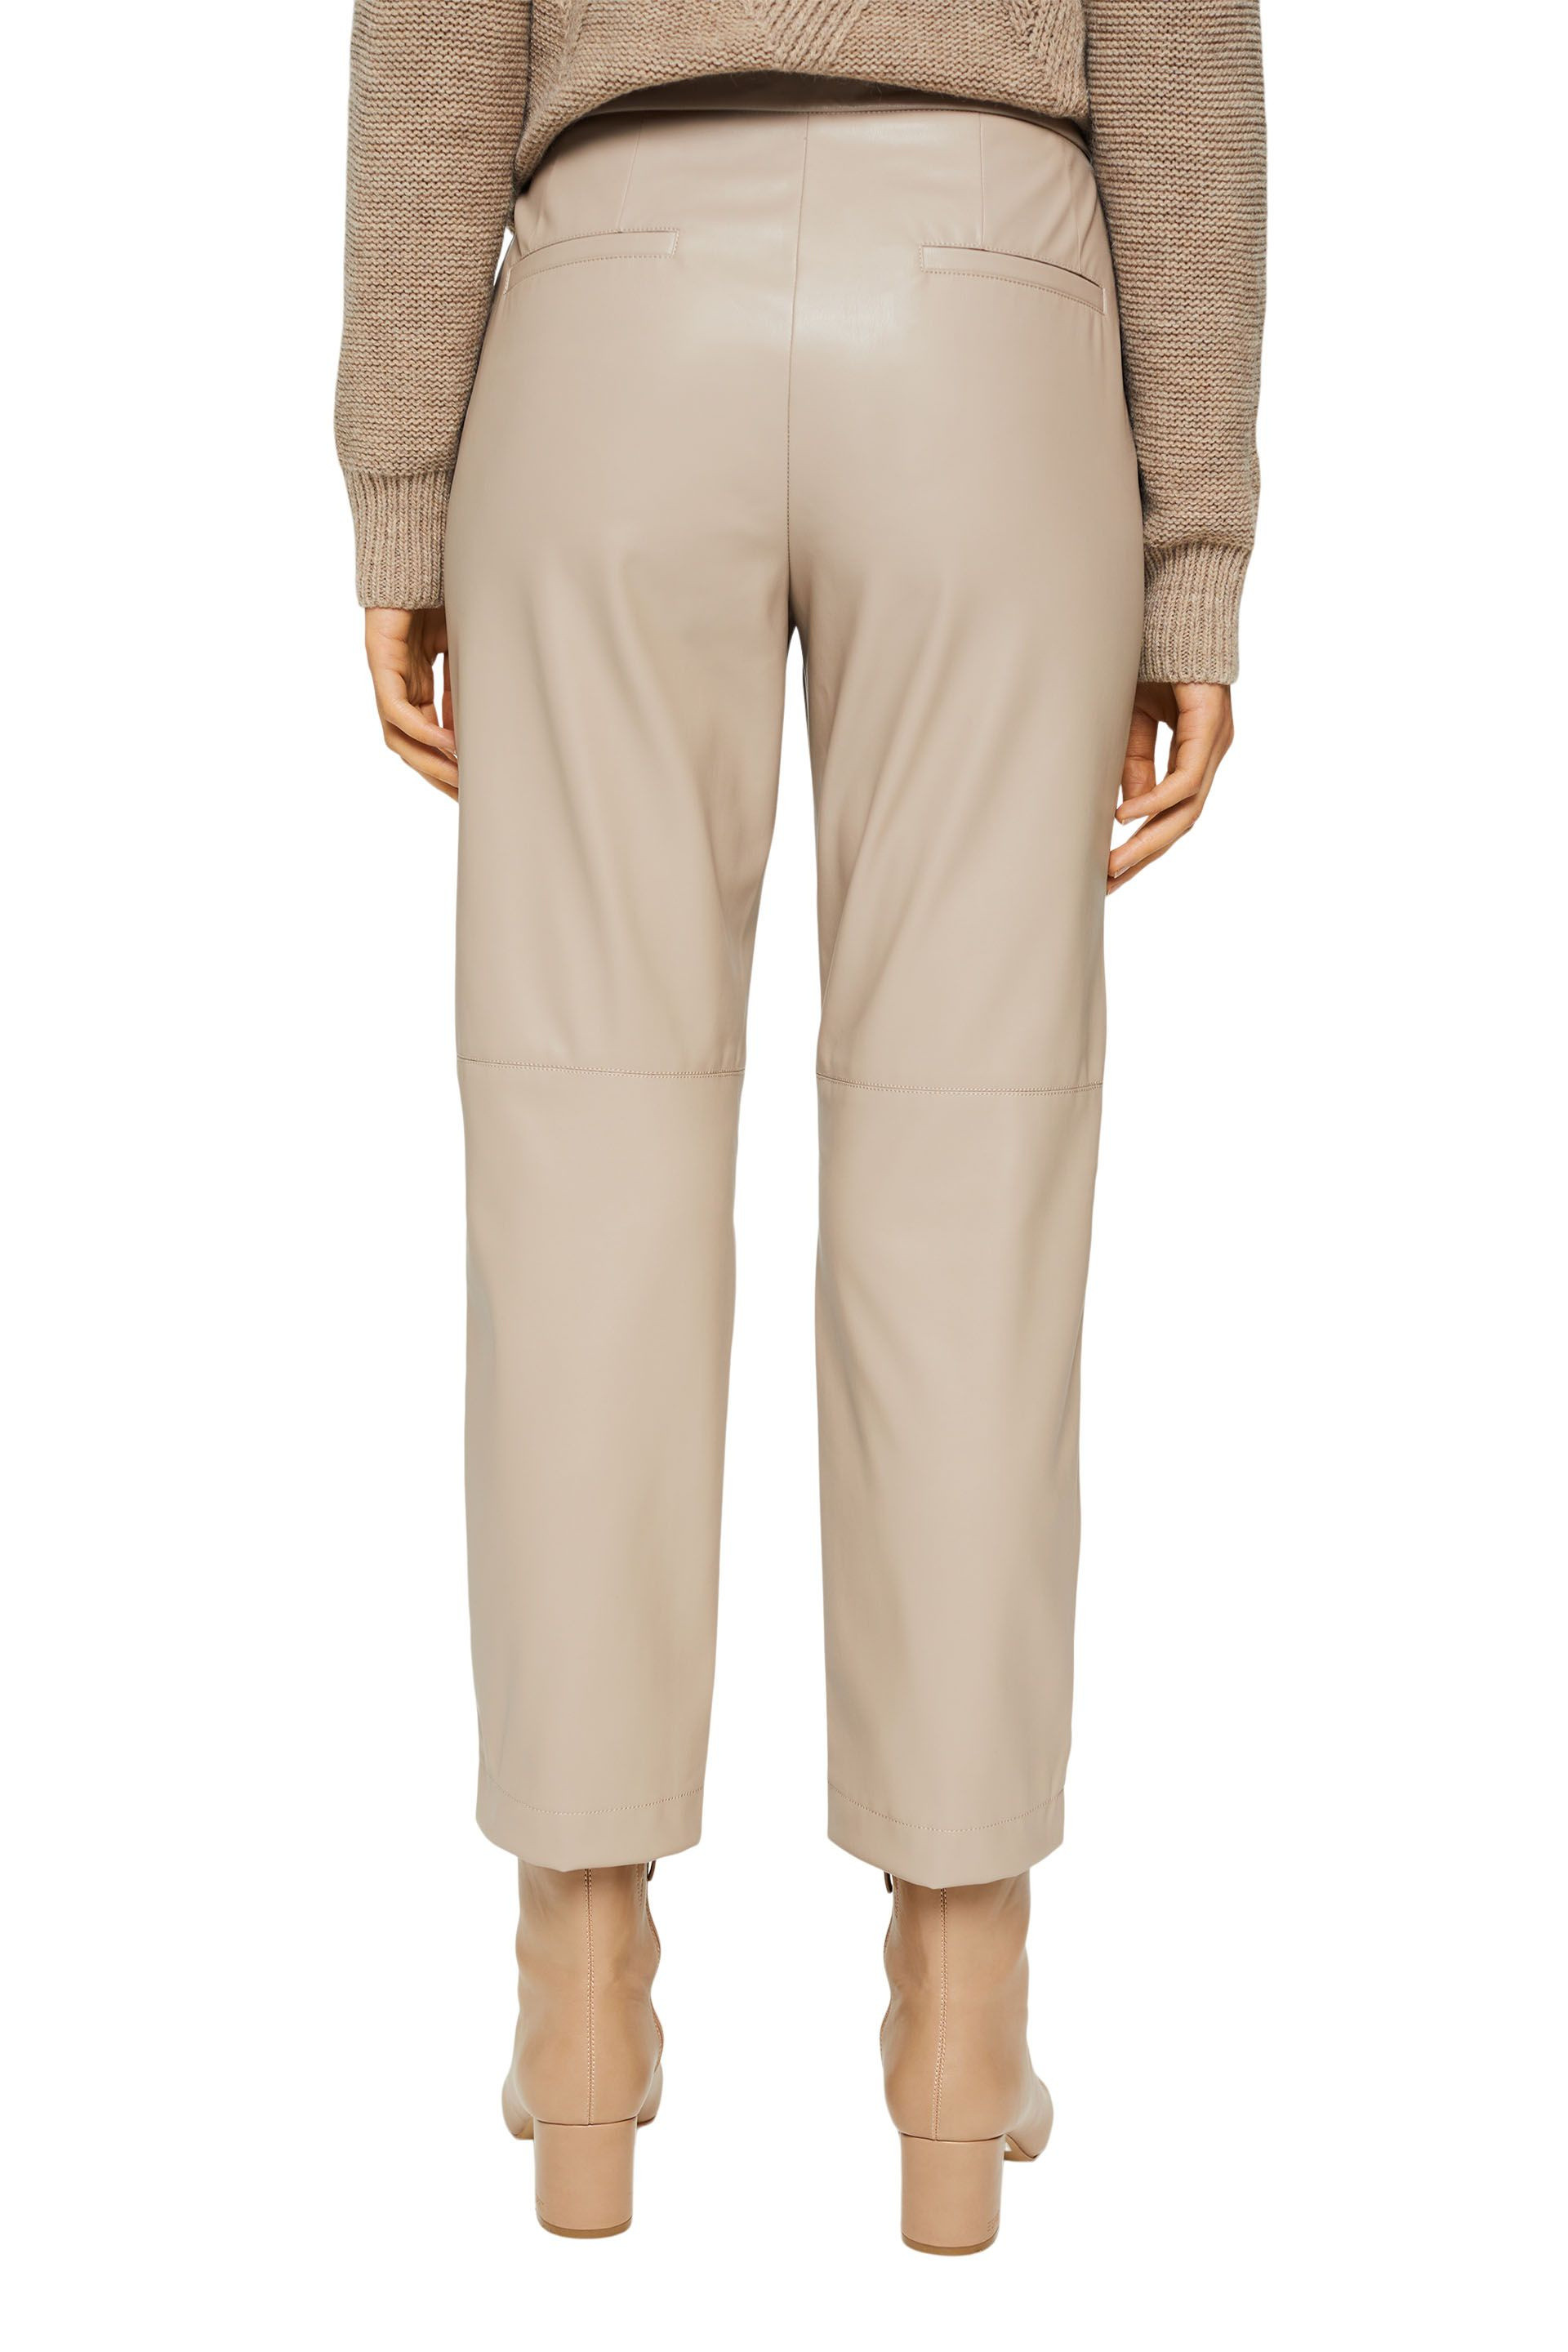 Cropped faux leather trousers, Light Beige, large image number 2